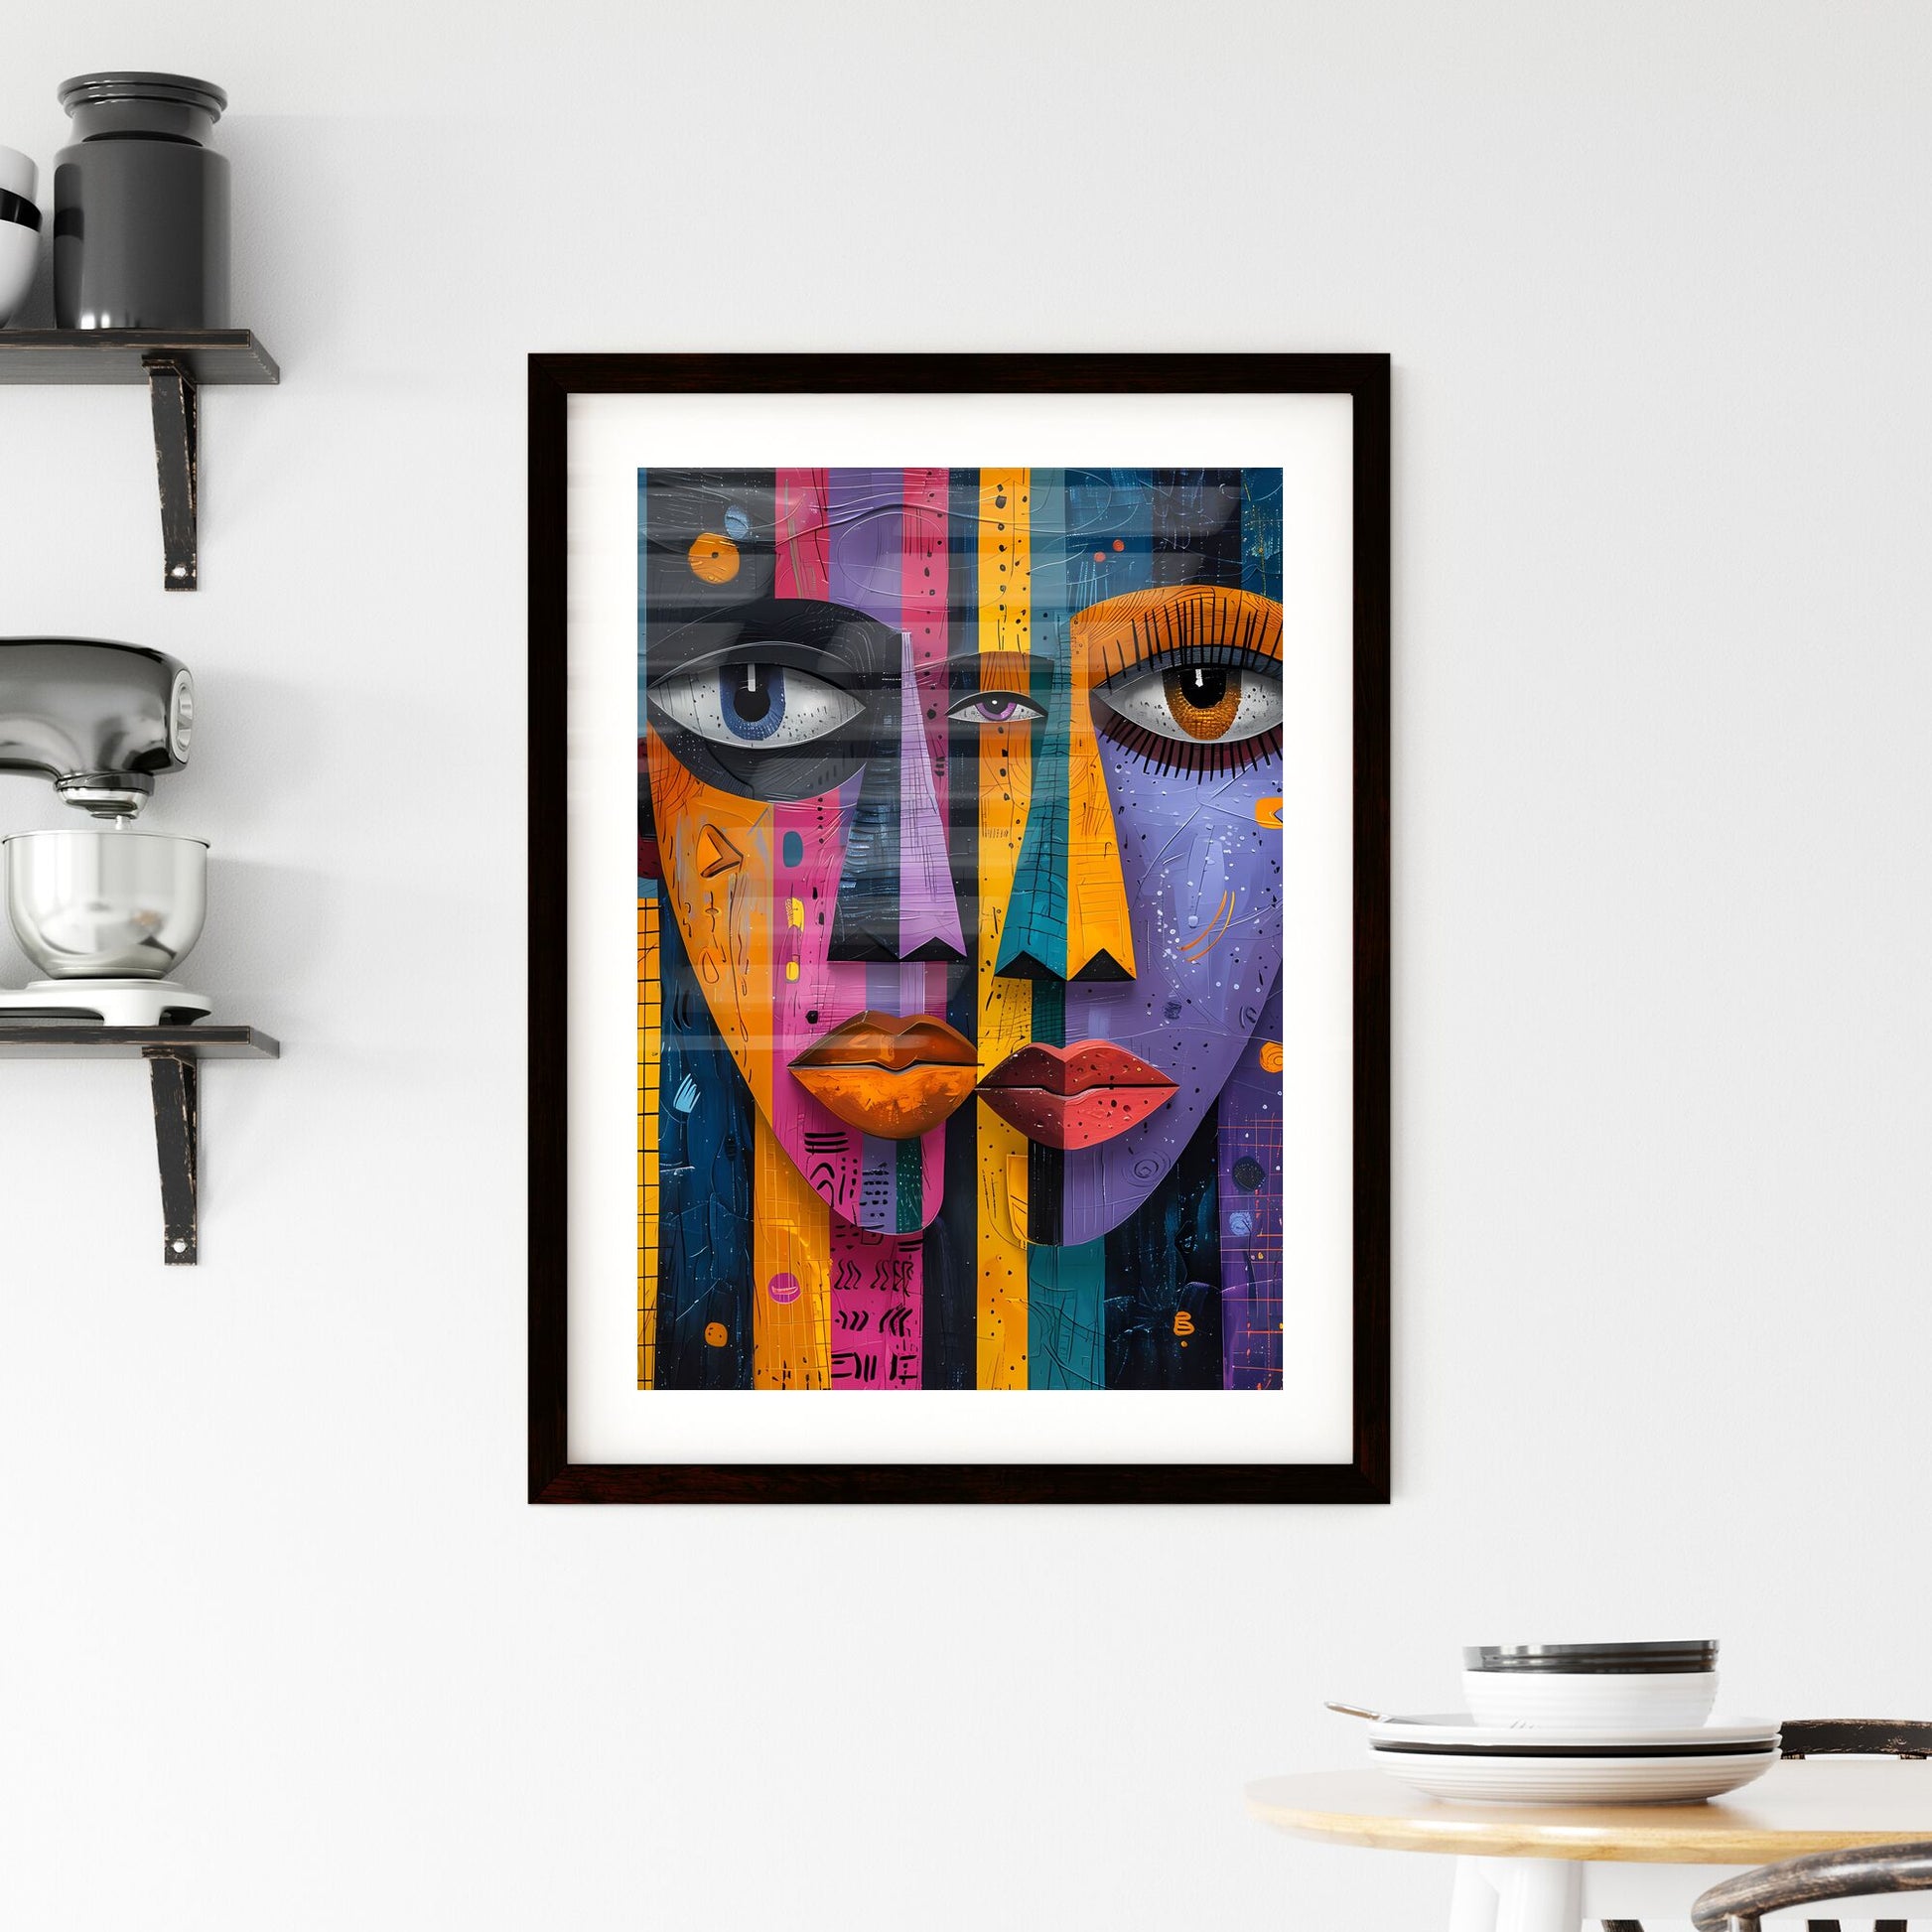 Modern African Art: Vibrant Pastel Colorful Face Painting with Human Shapes and Urban Patterns Default Title